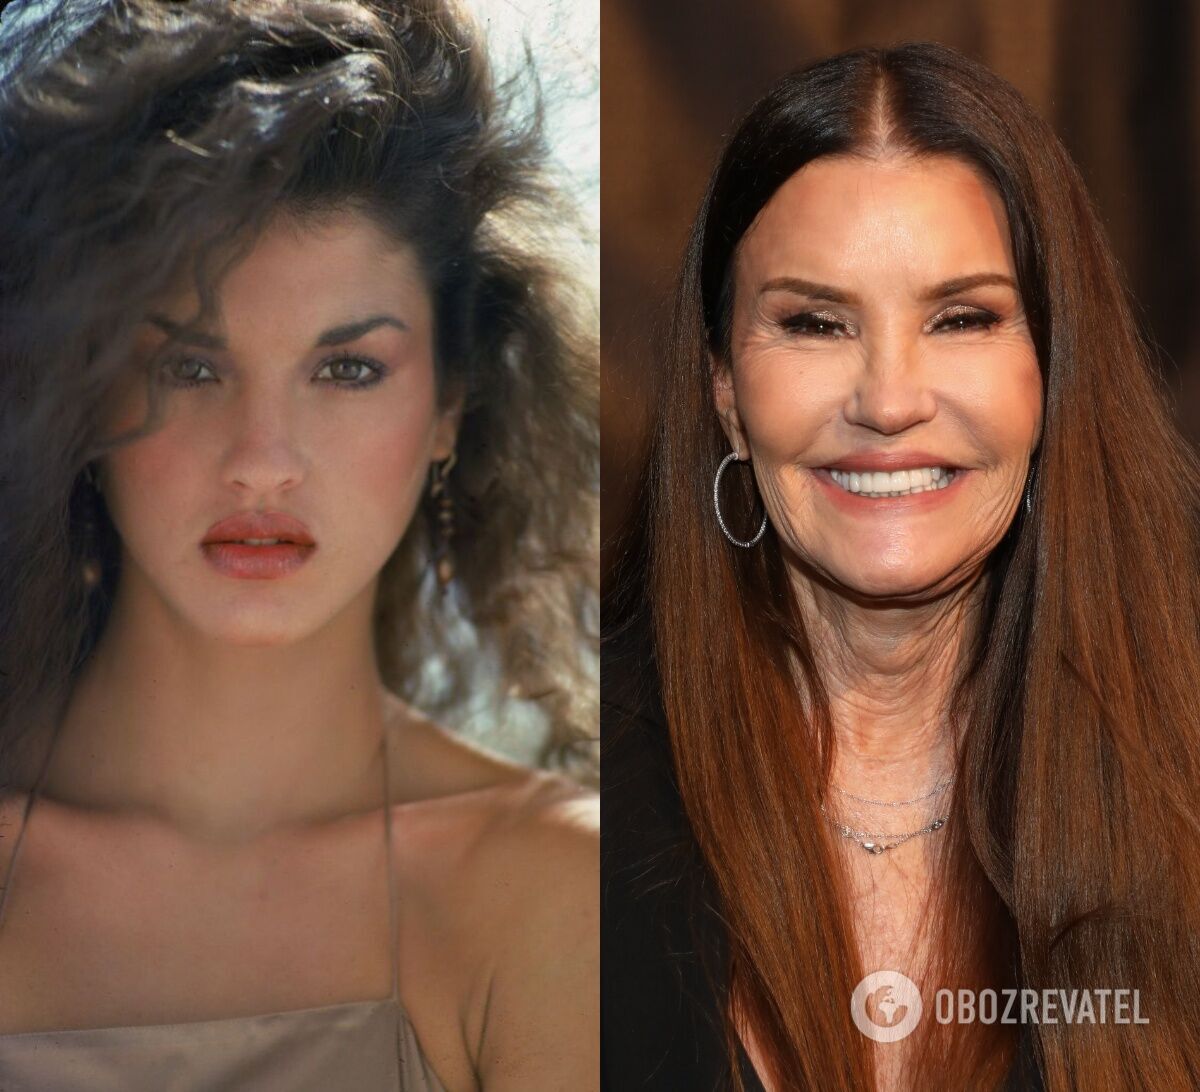 Clearly too much: 5 stars who disfigured themselves with plastic surgery